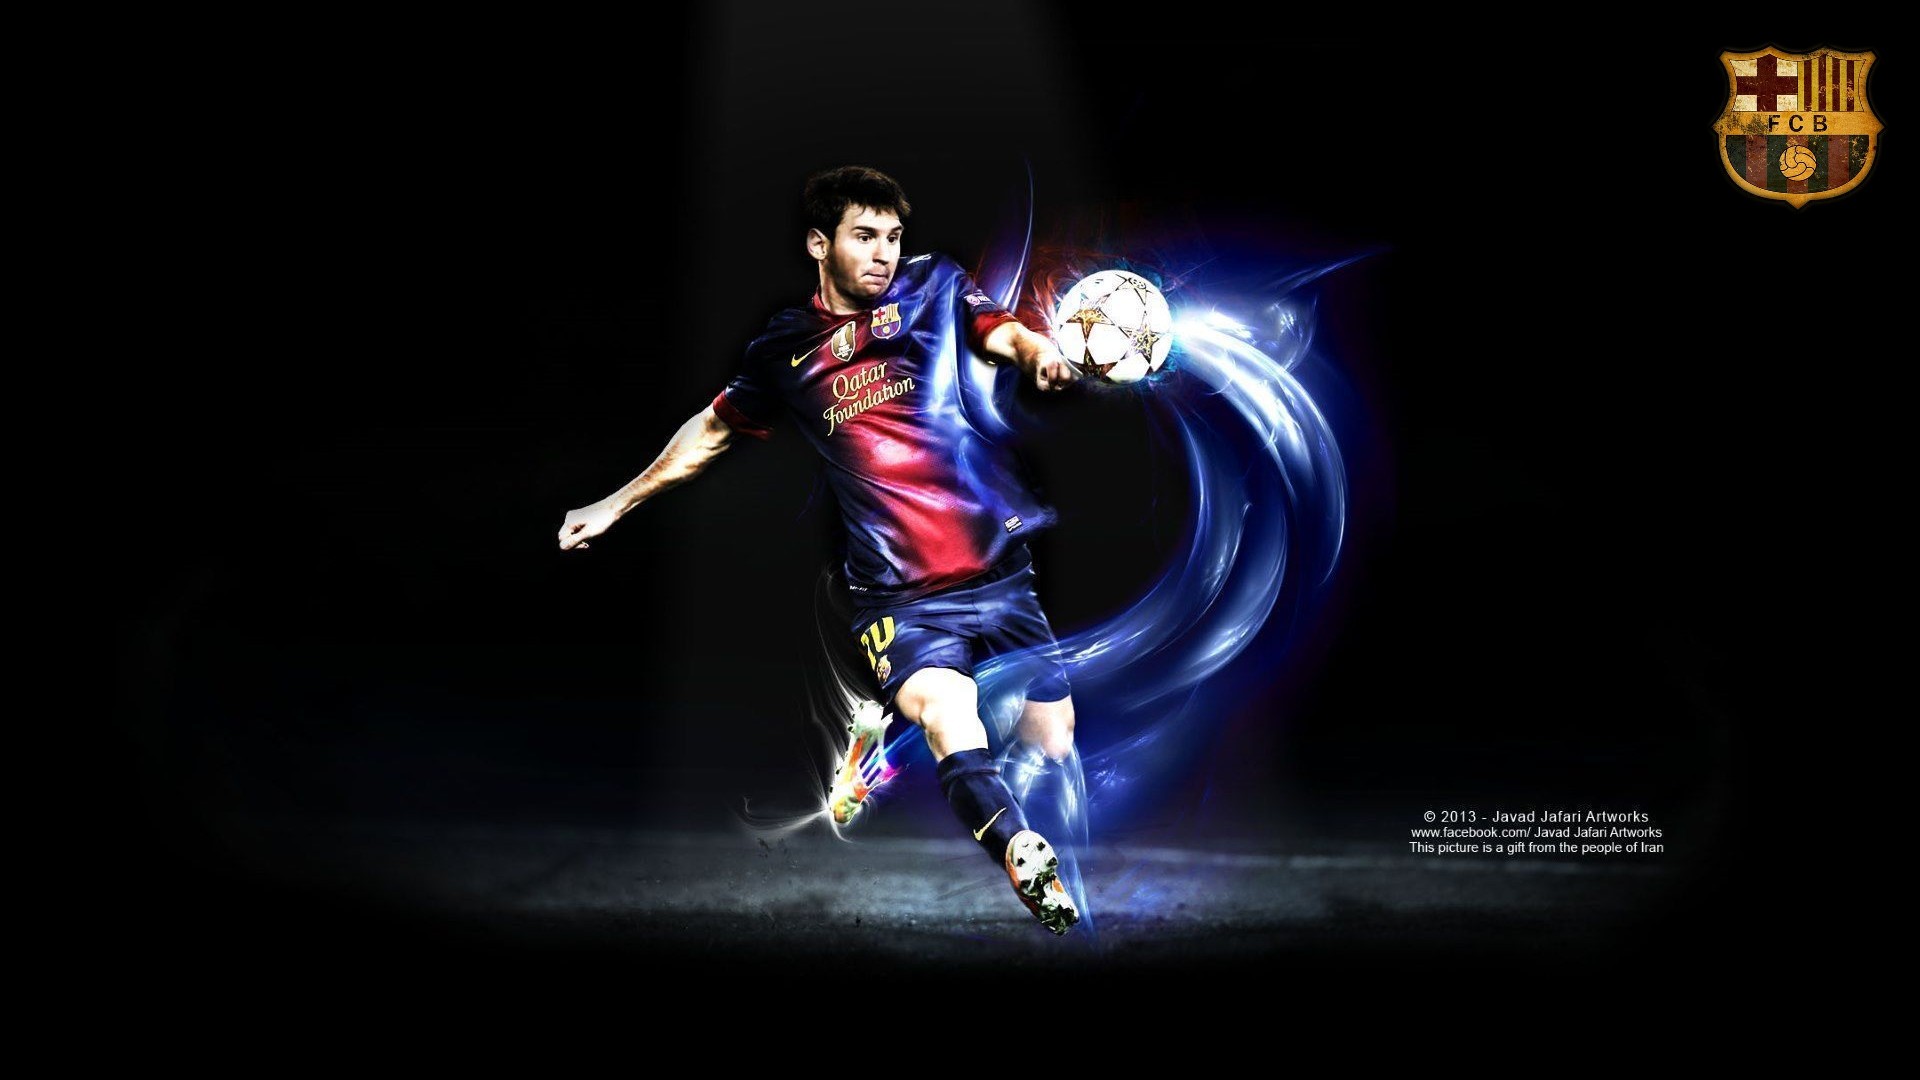 Wallpapers Messi with resolution 1920x1080 pixel. You can make this wallpaper for your Mac or Windows Desktop Background, iPhone, Android or Tablet and another Smartphone device